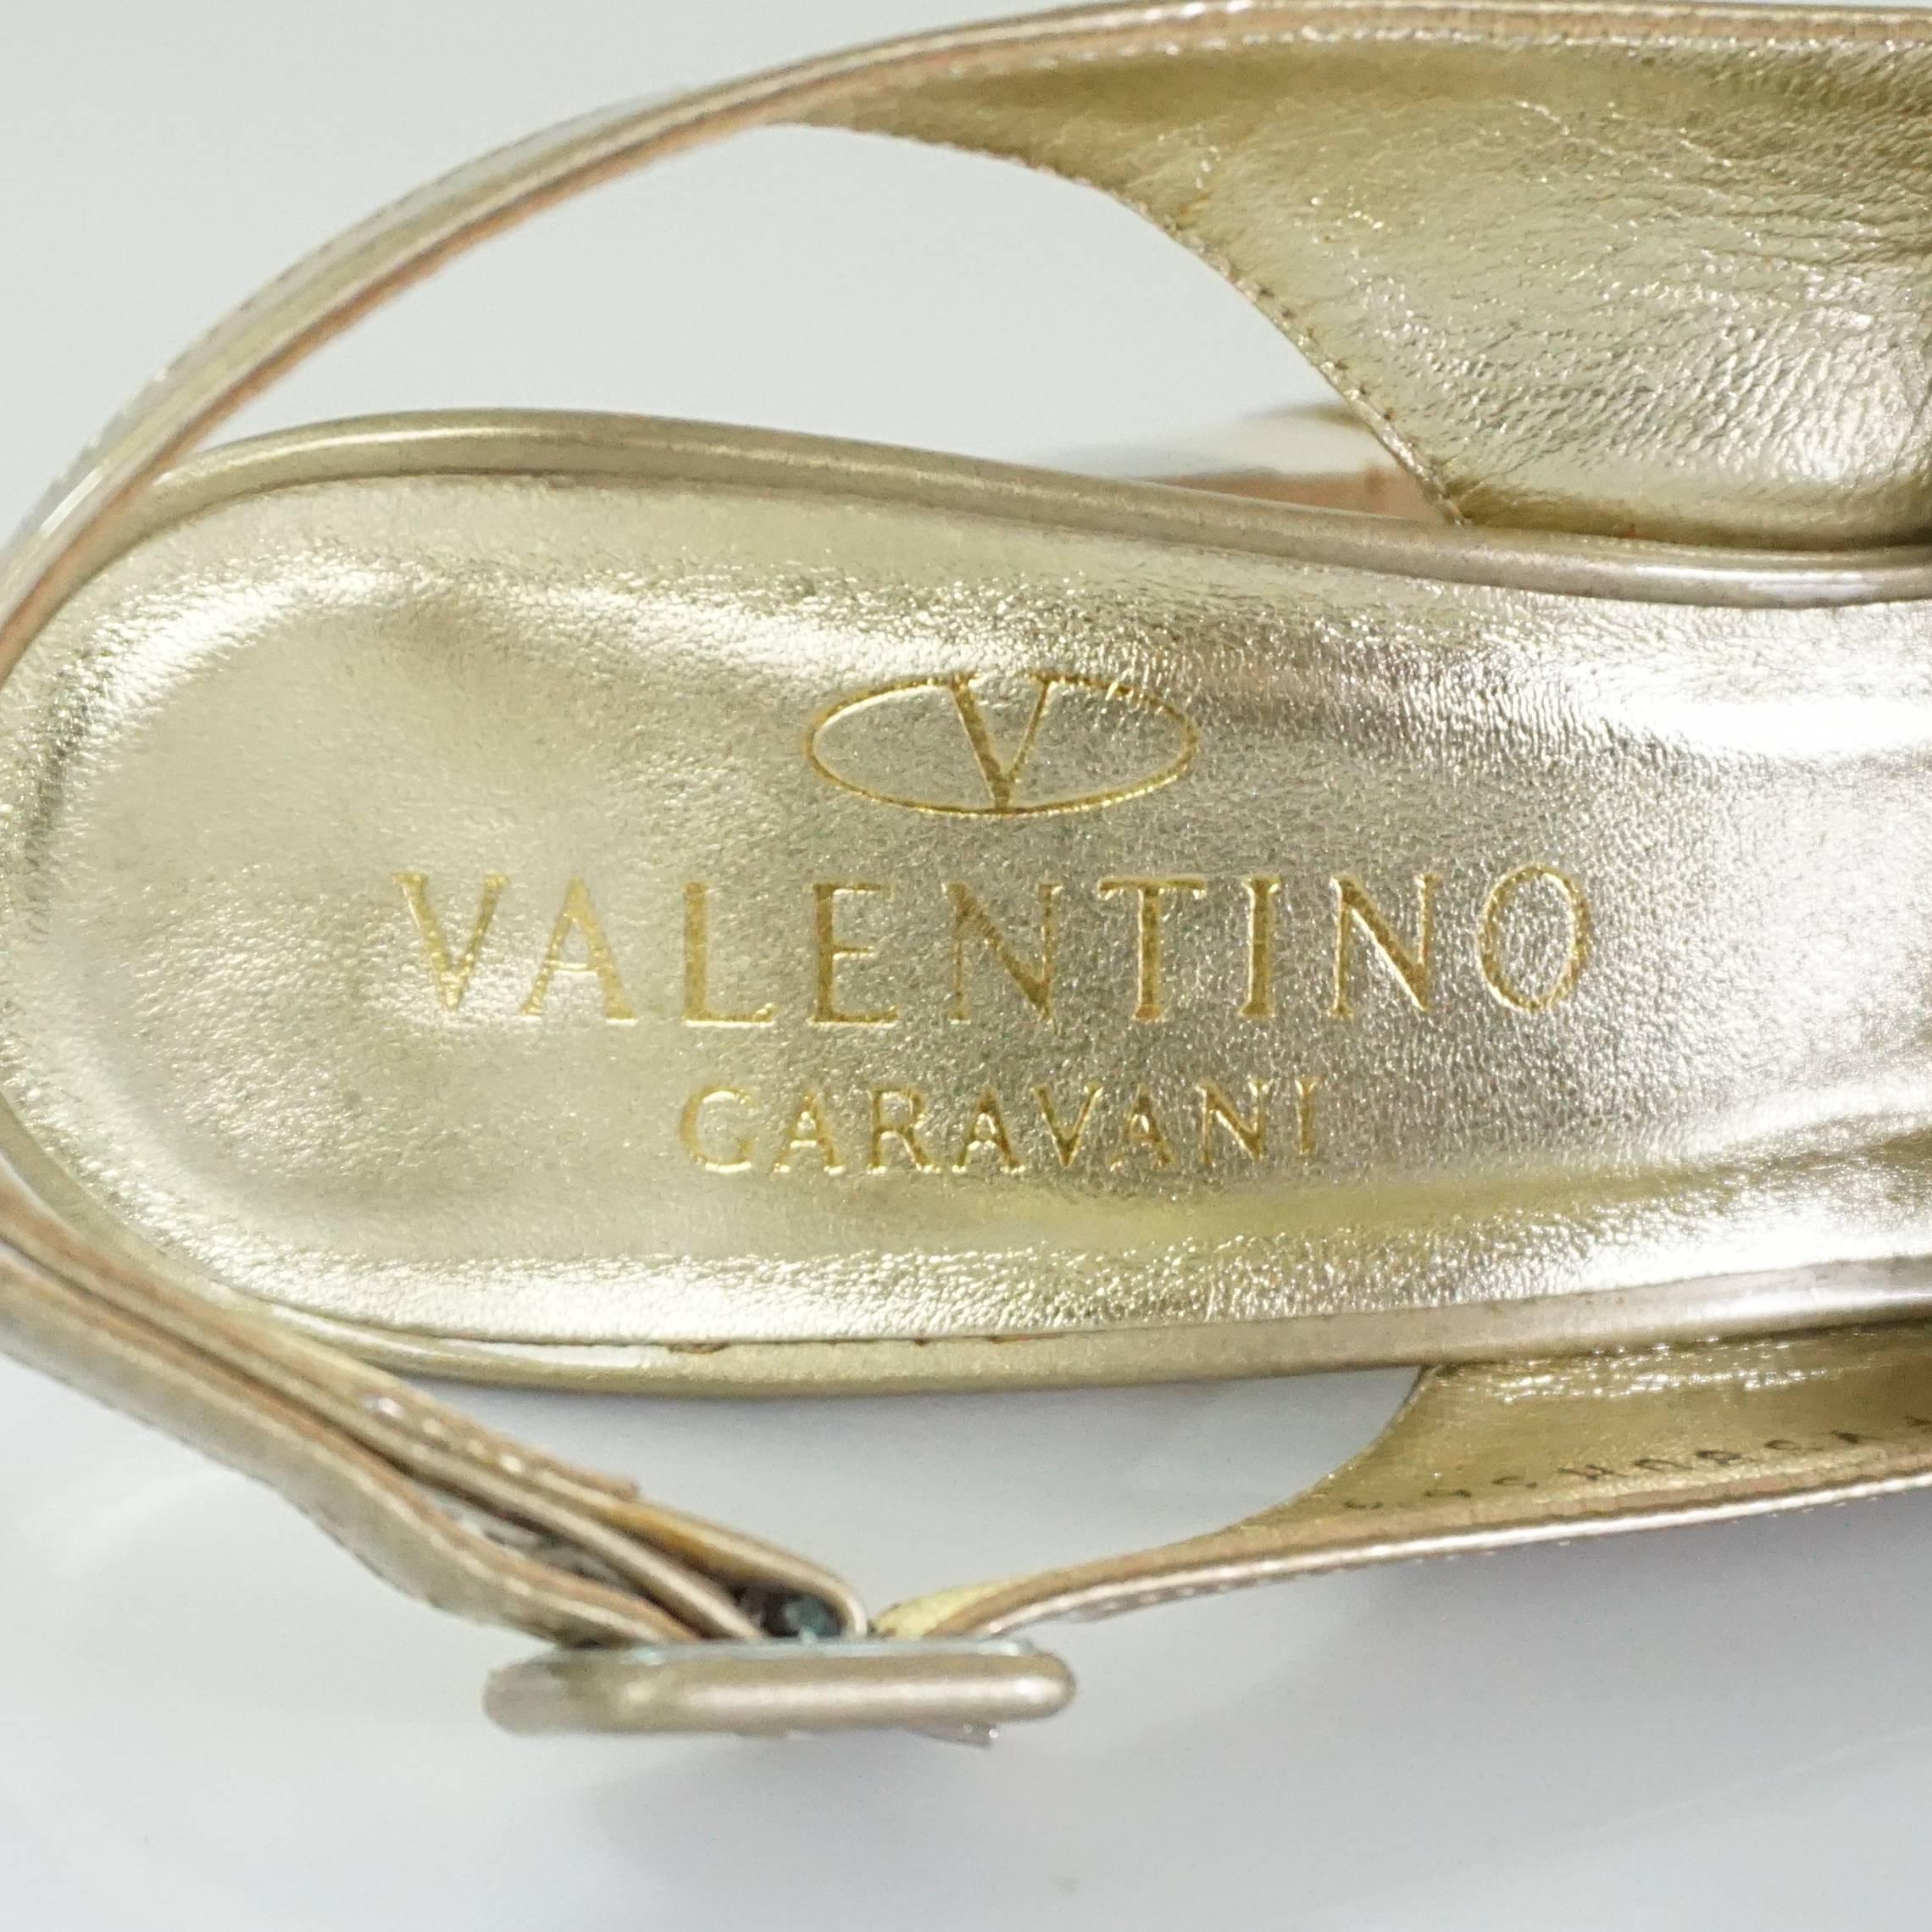 Valentino Gold Patent Slingbacks with Bow and Chunky Heel - 36.5  1